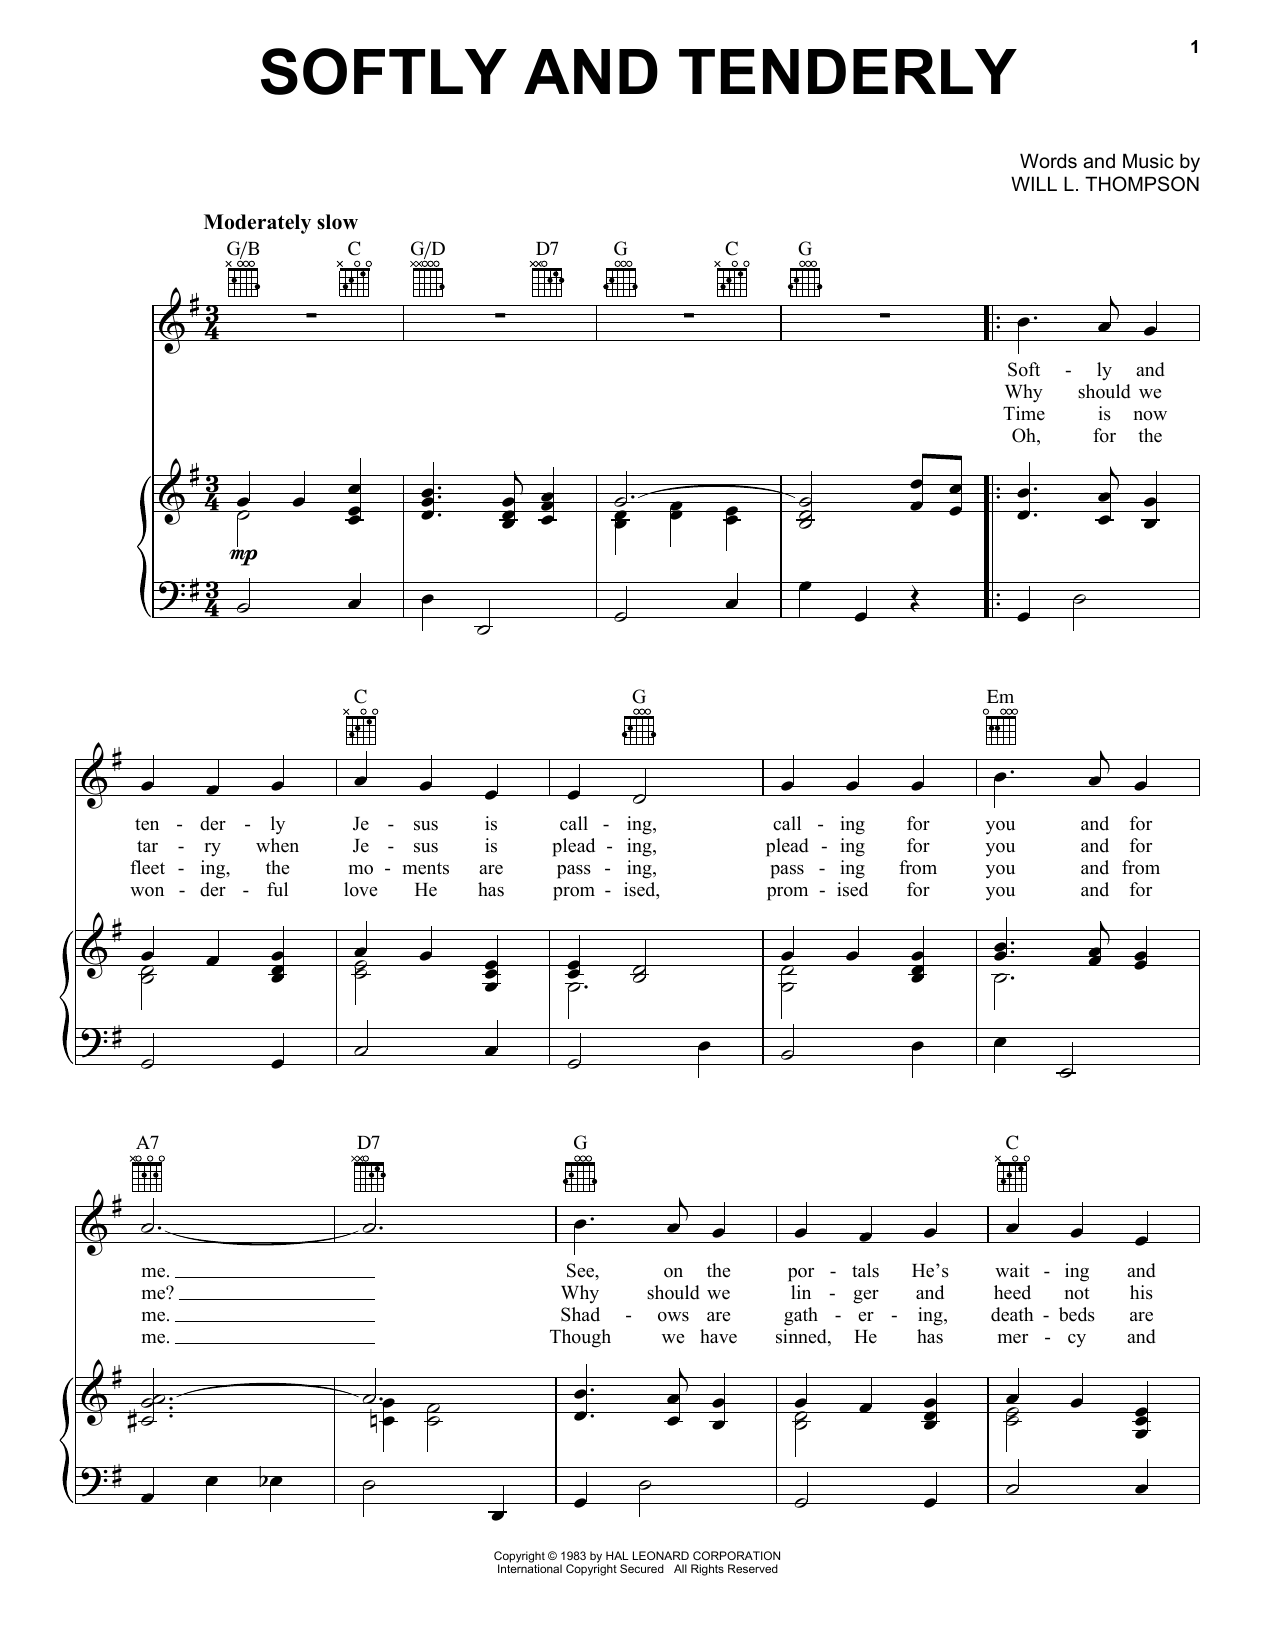 Will L. Thompson Softly And Tenderly sheet music notes printable PDF score